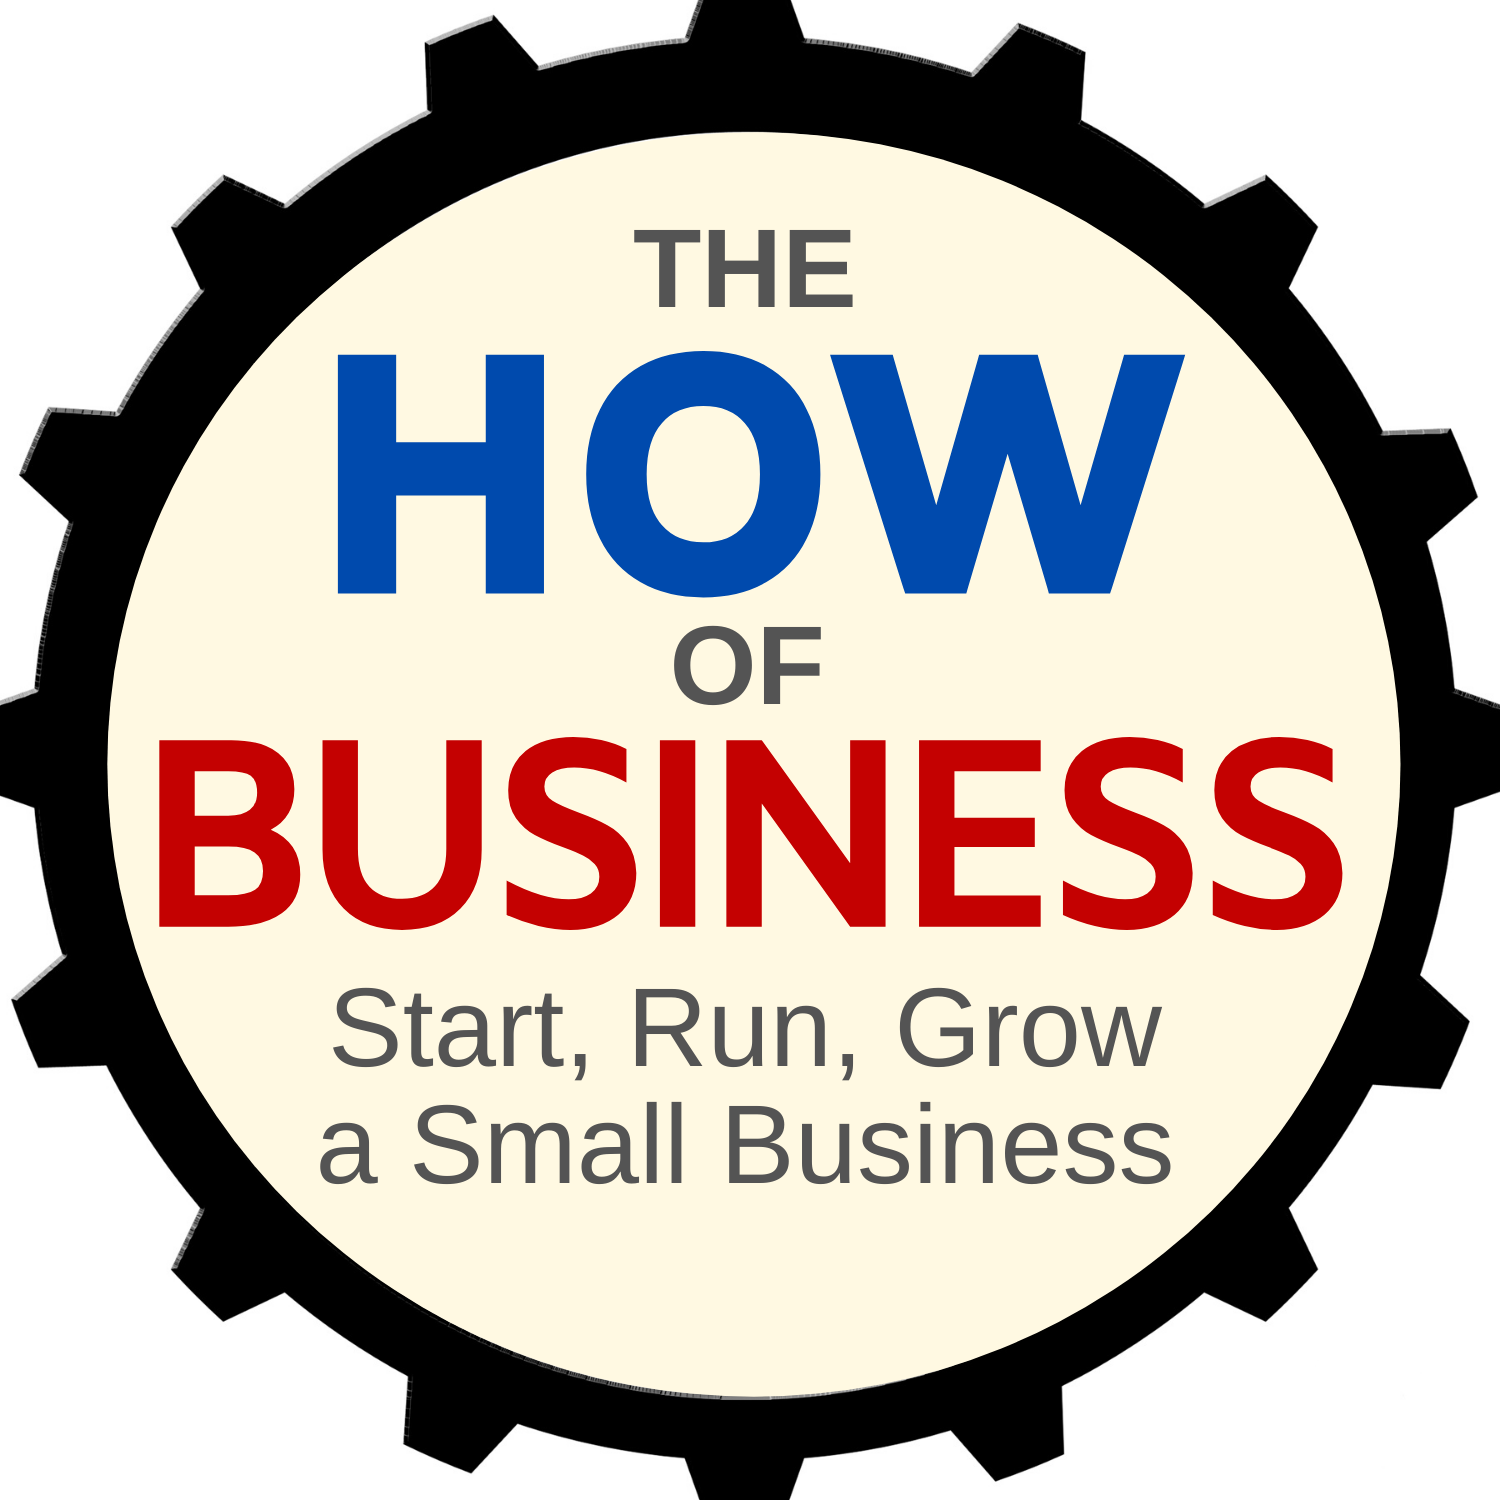 The How of Bussiness